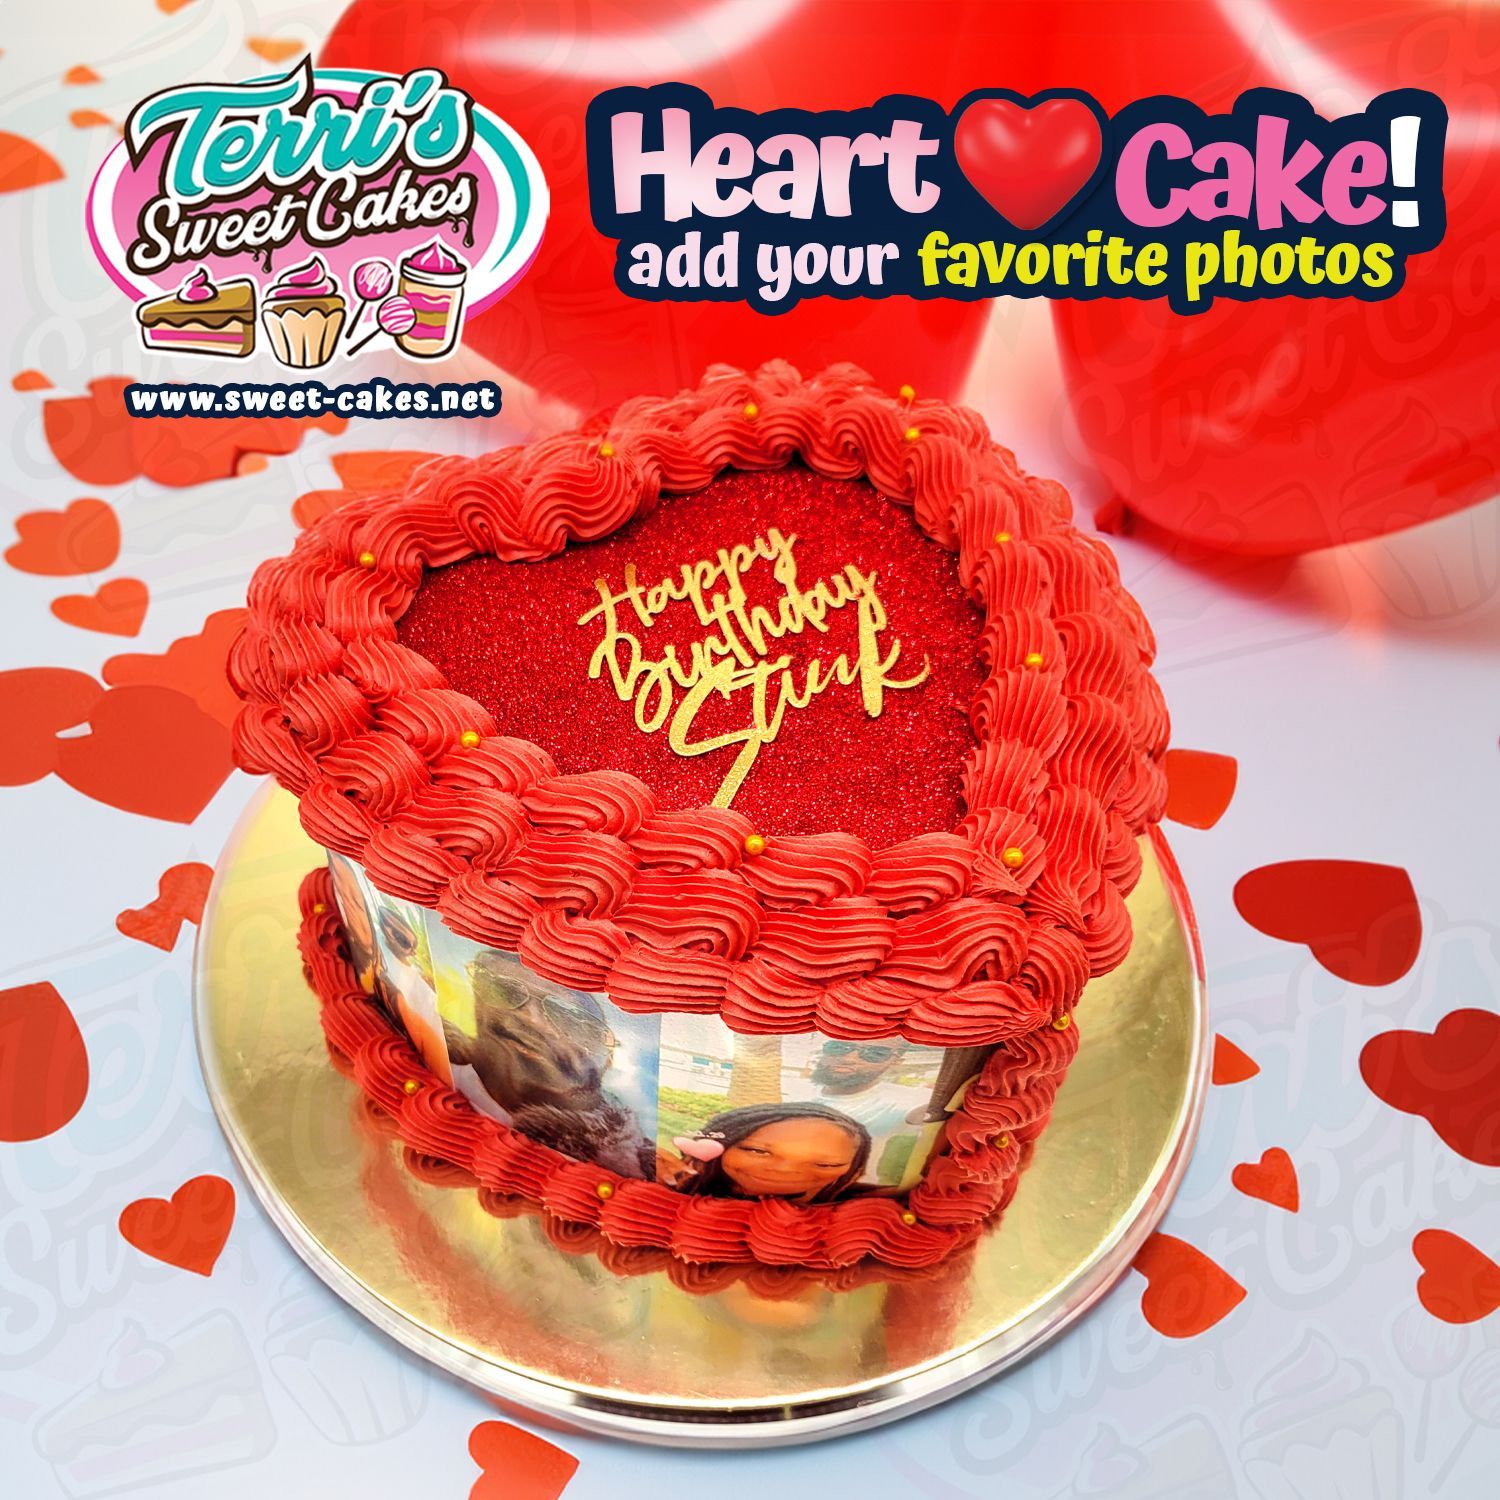 Heart Cake with pictures by Terri's Sweet Cakes!